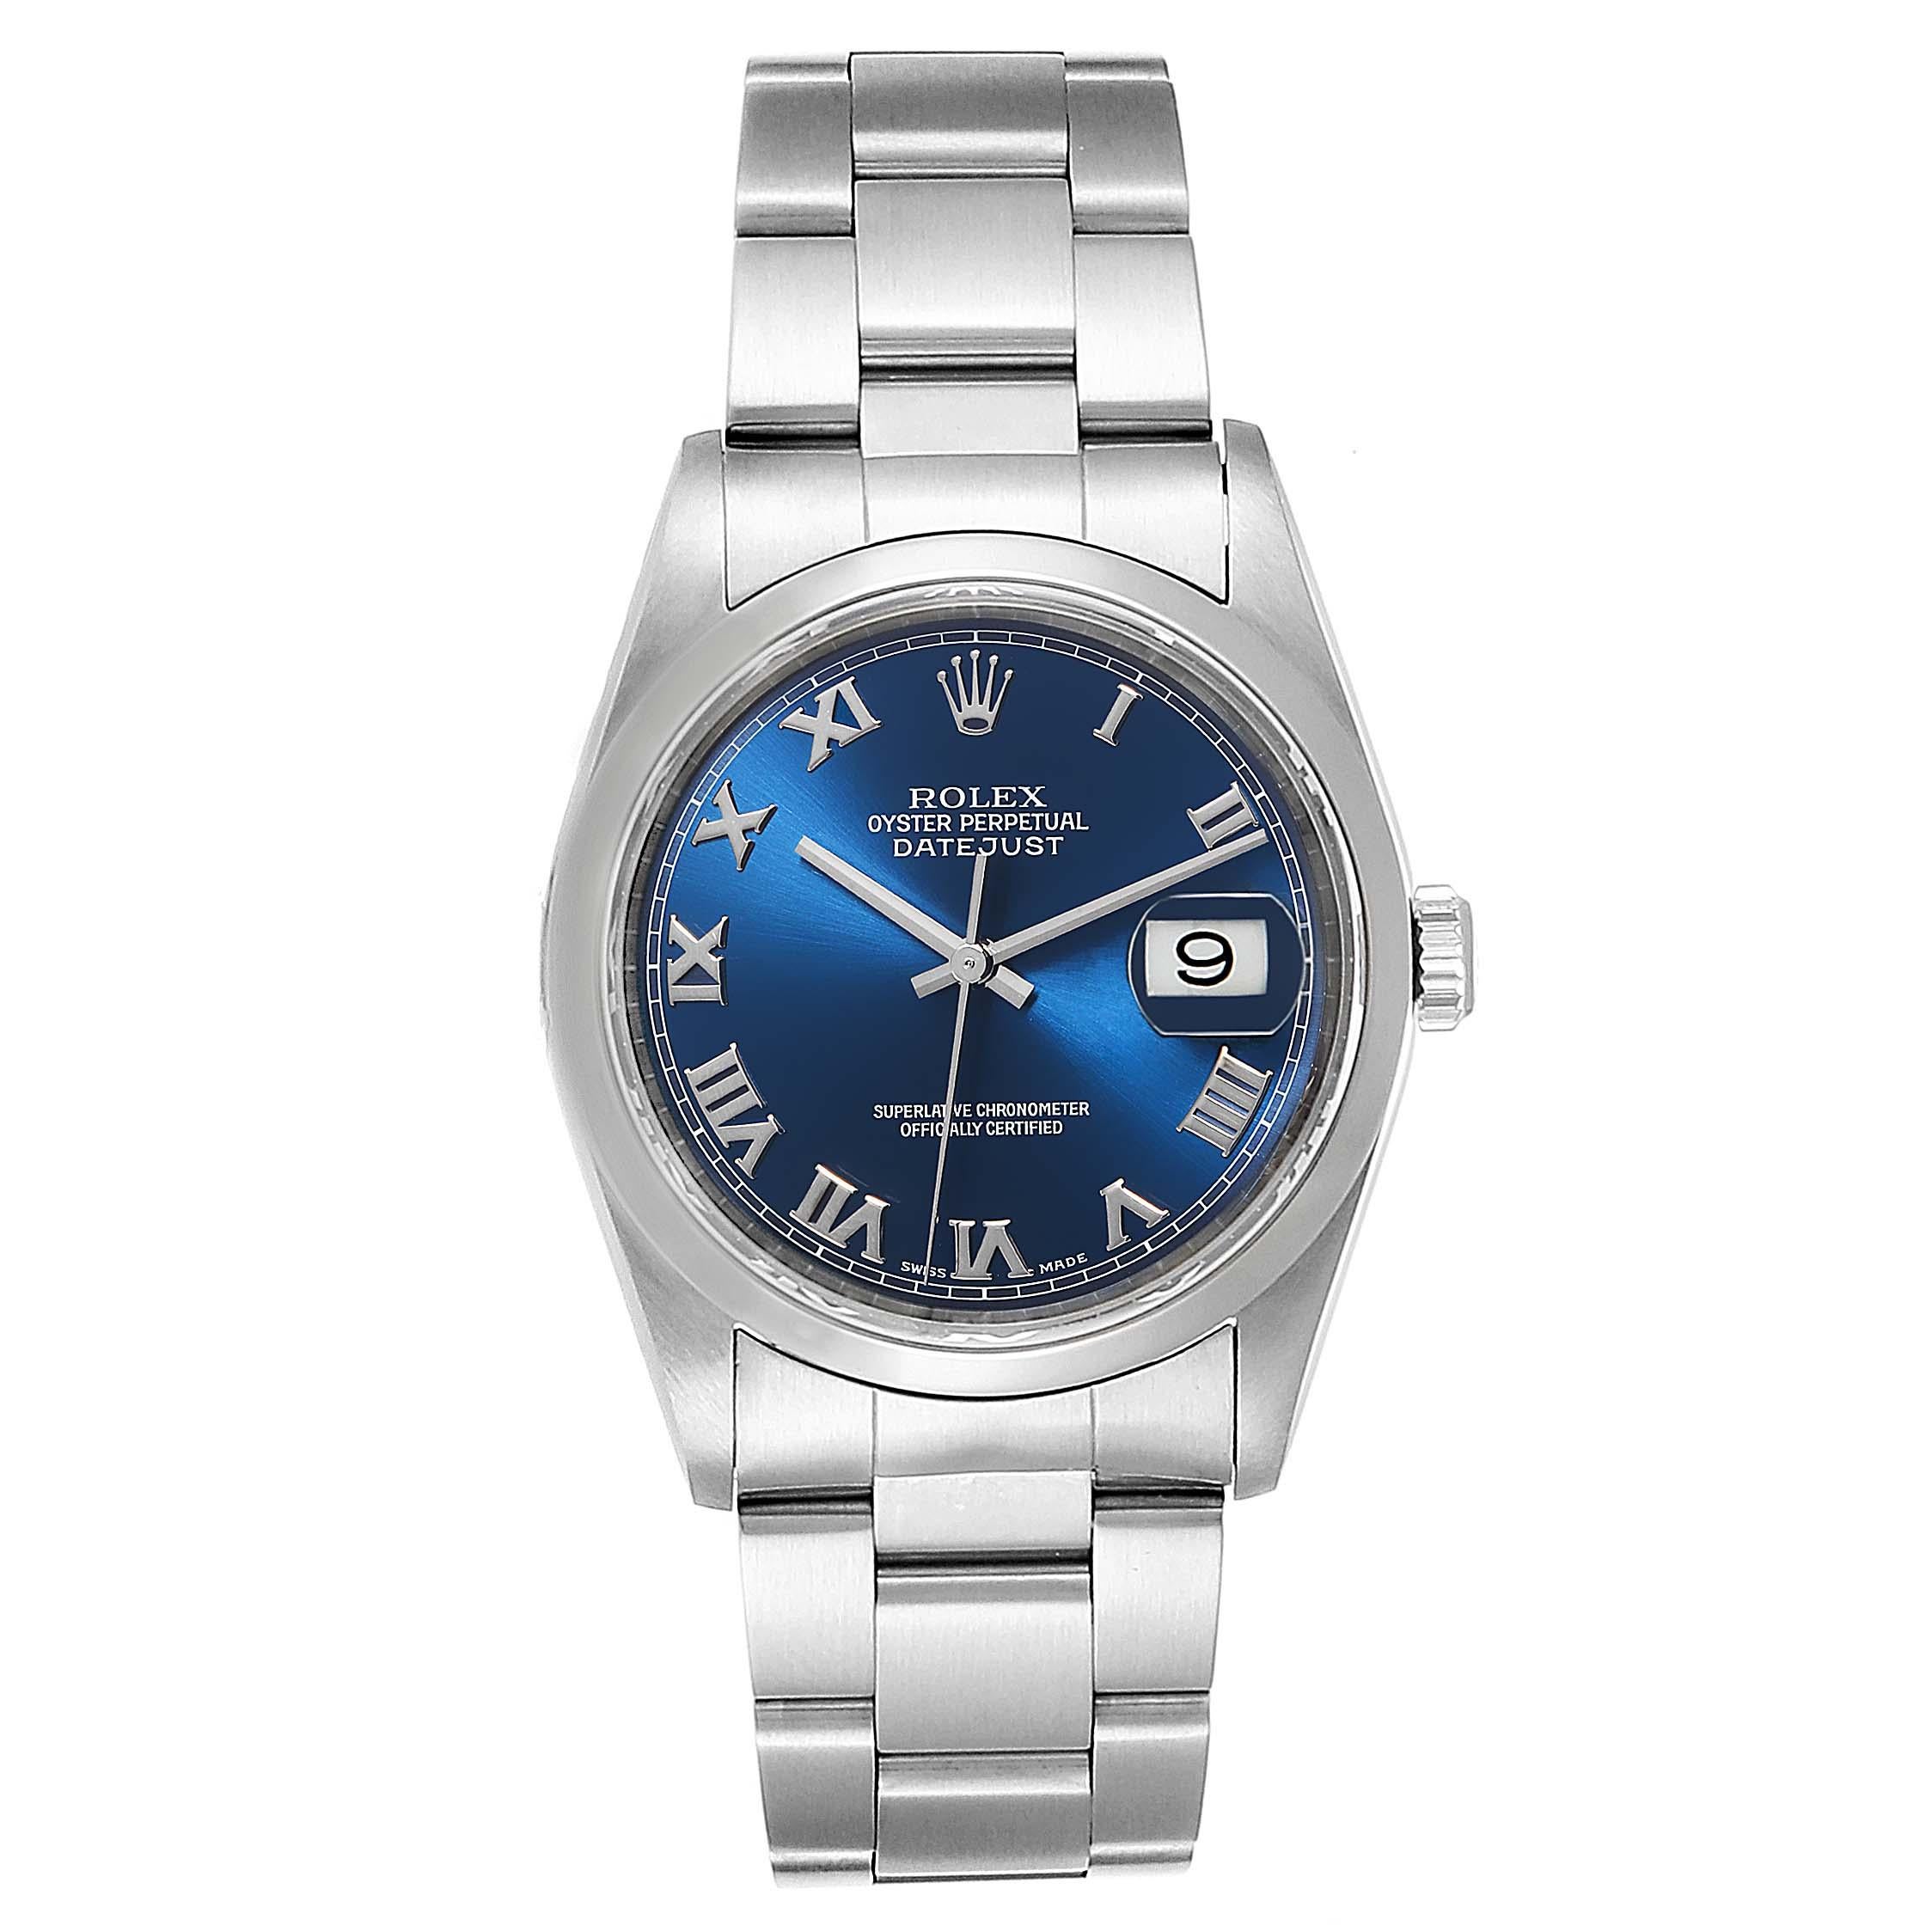 Rolex Datejust 36 Blue Dial Oyster Bracelet Steel Mens Watch 16200. Officially certified chronometer automatic self-winding movement. Stainless steel oyster case 36 mm in diameter. Rolex logo on a crown. Stainless steel smooth bezel. Scratch